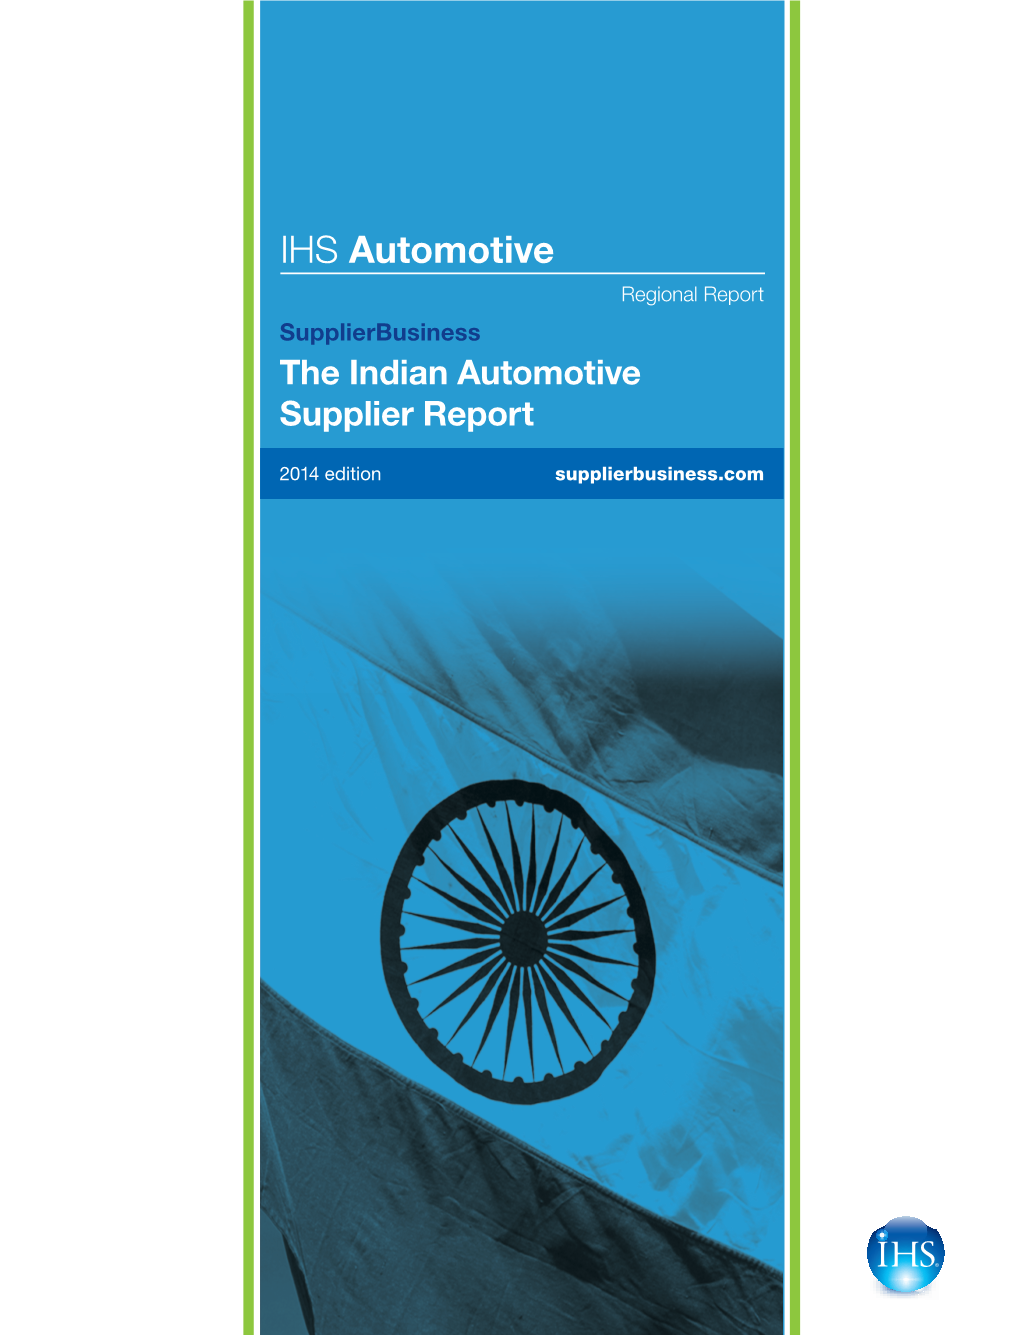 IHS Automotive Regional Report Supplierbusiness the Indian Automotive Supplier Report